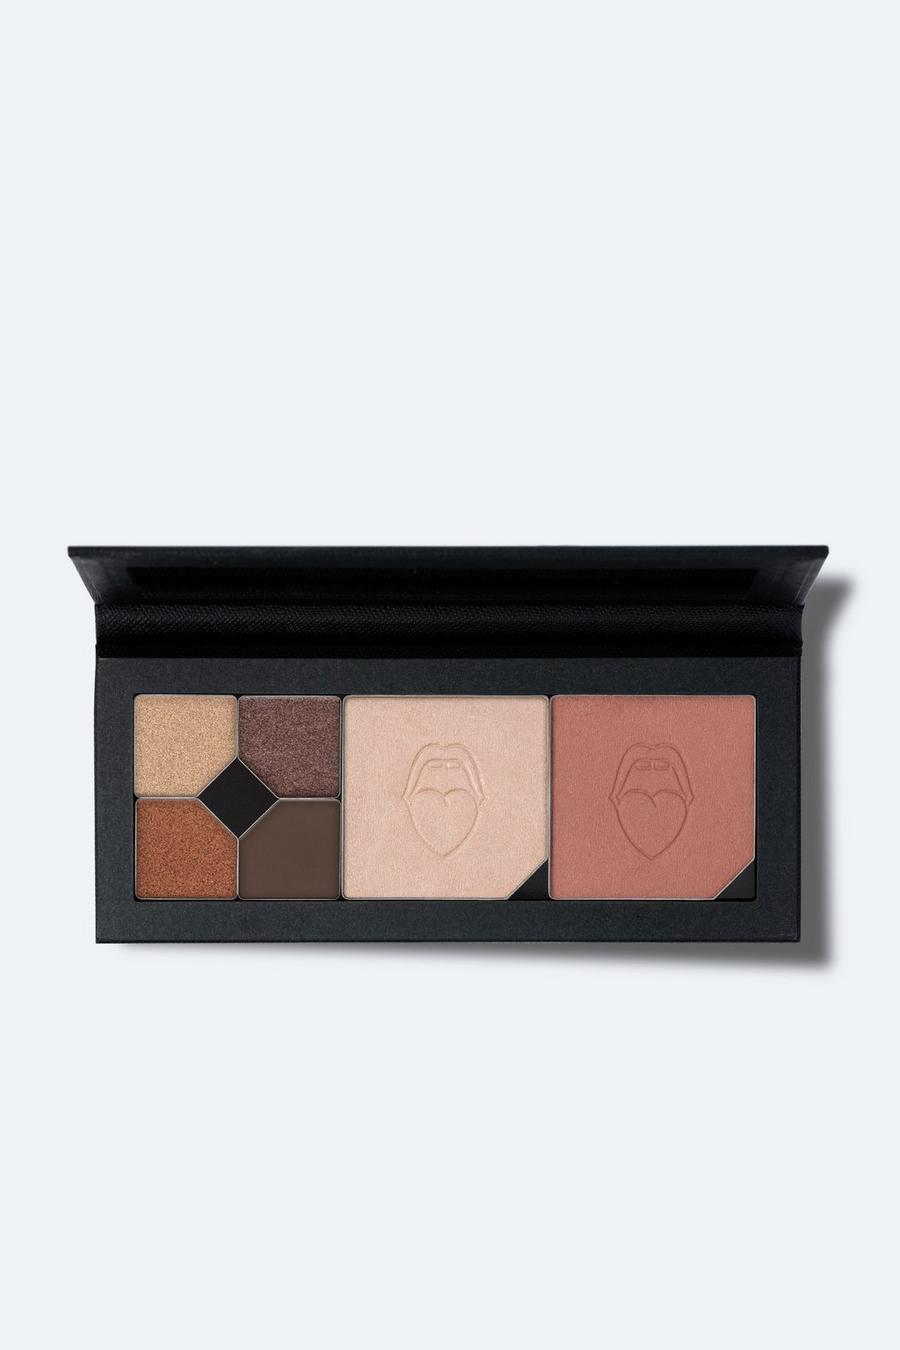 Nasty Gal Beauty Cream Highlighter Face and Eye Palette